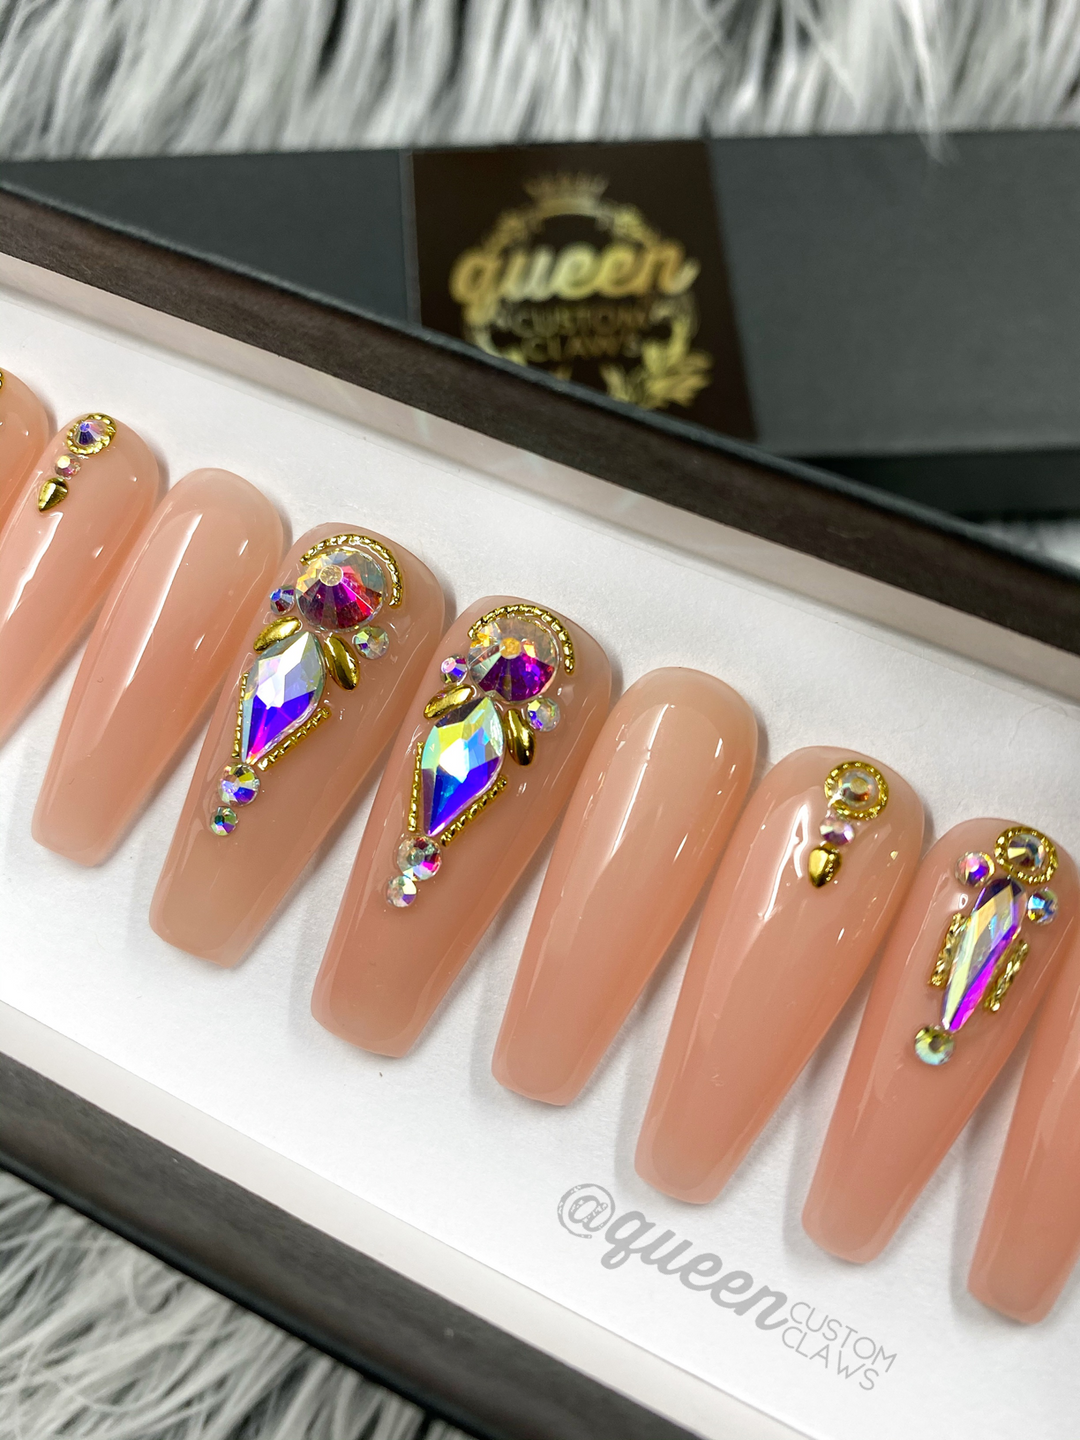 High Class- naked bling press on nails